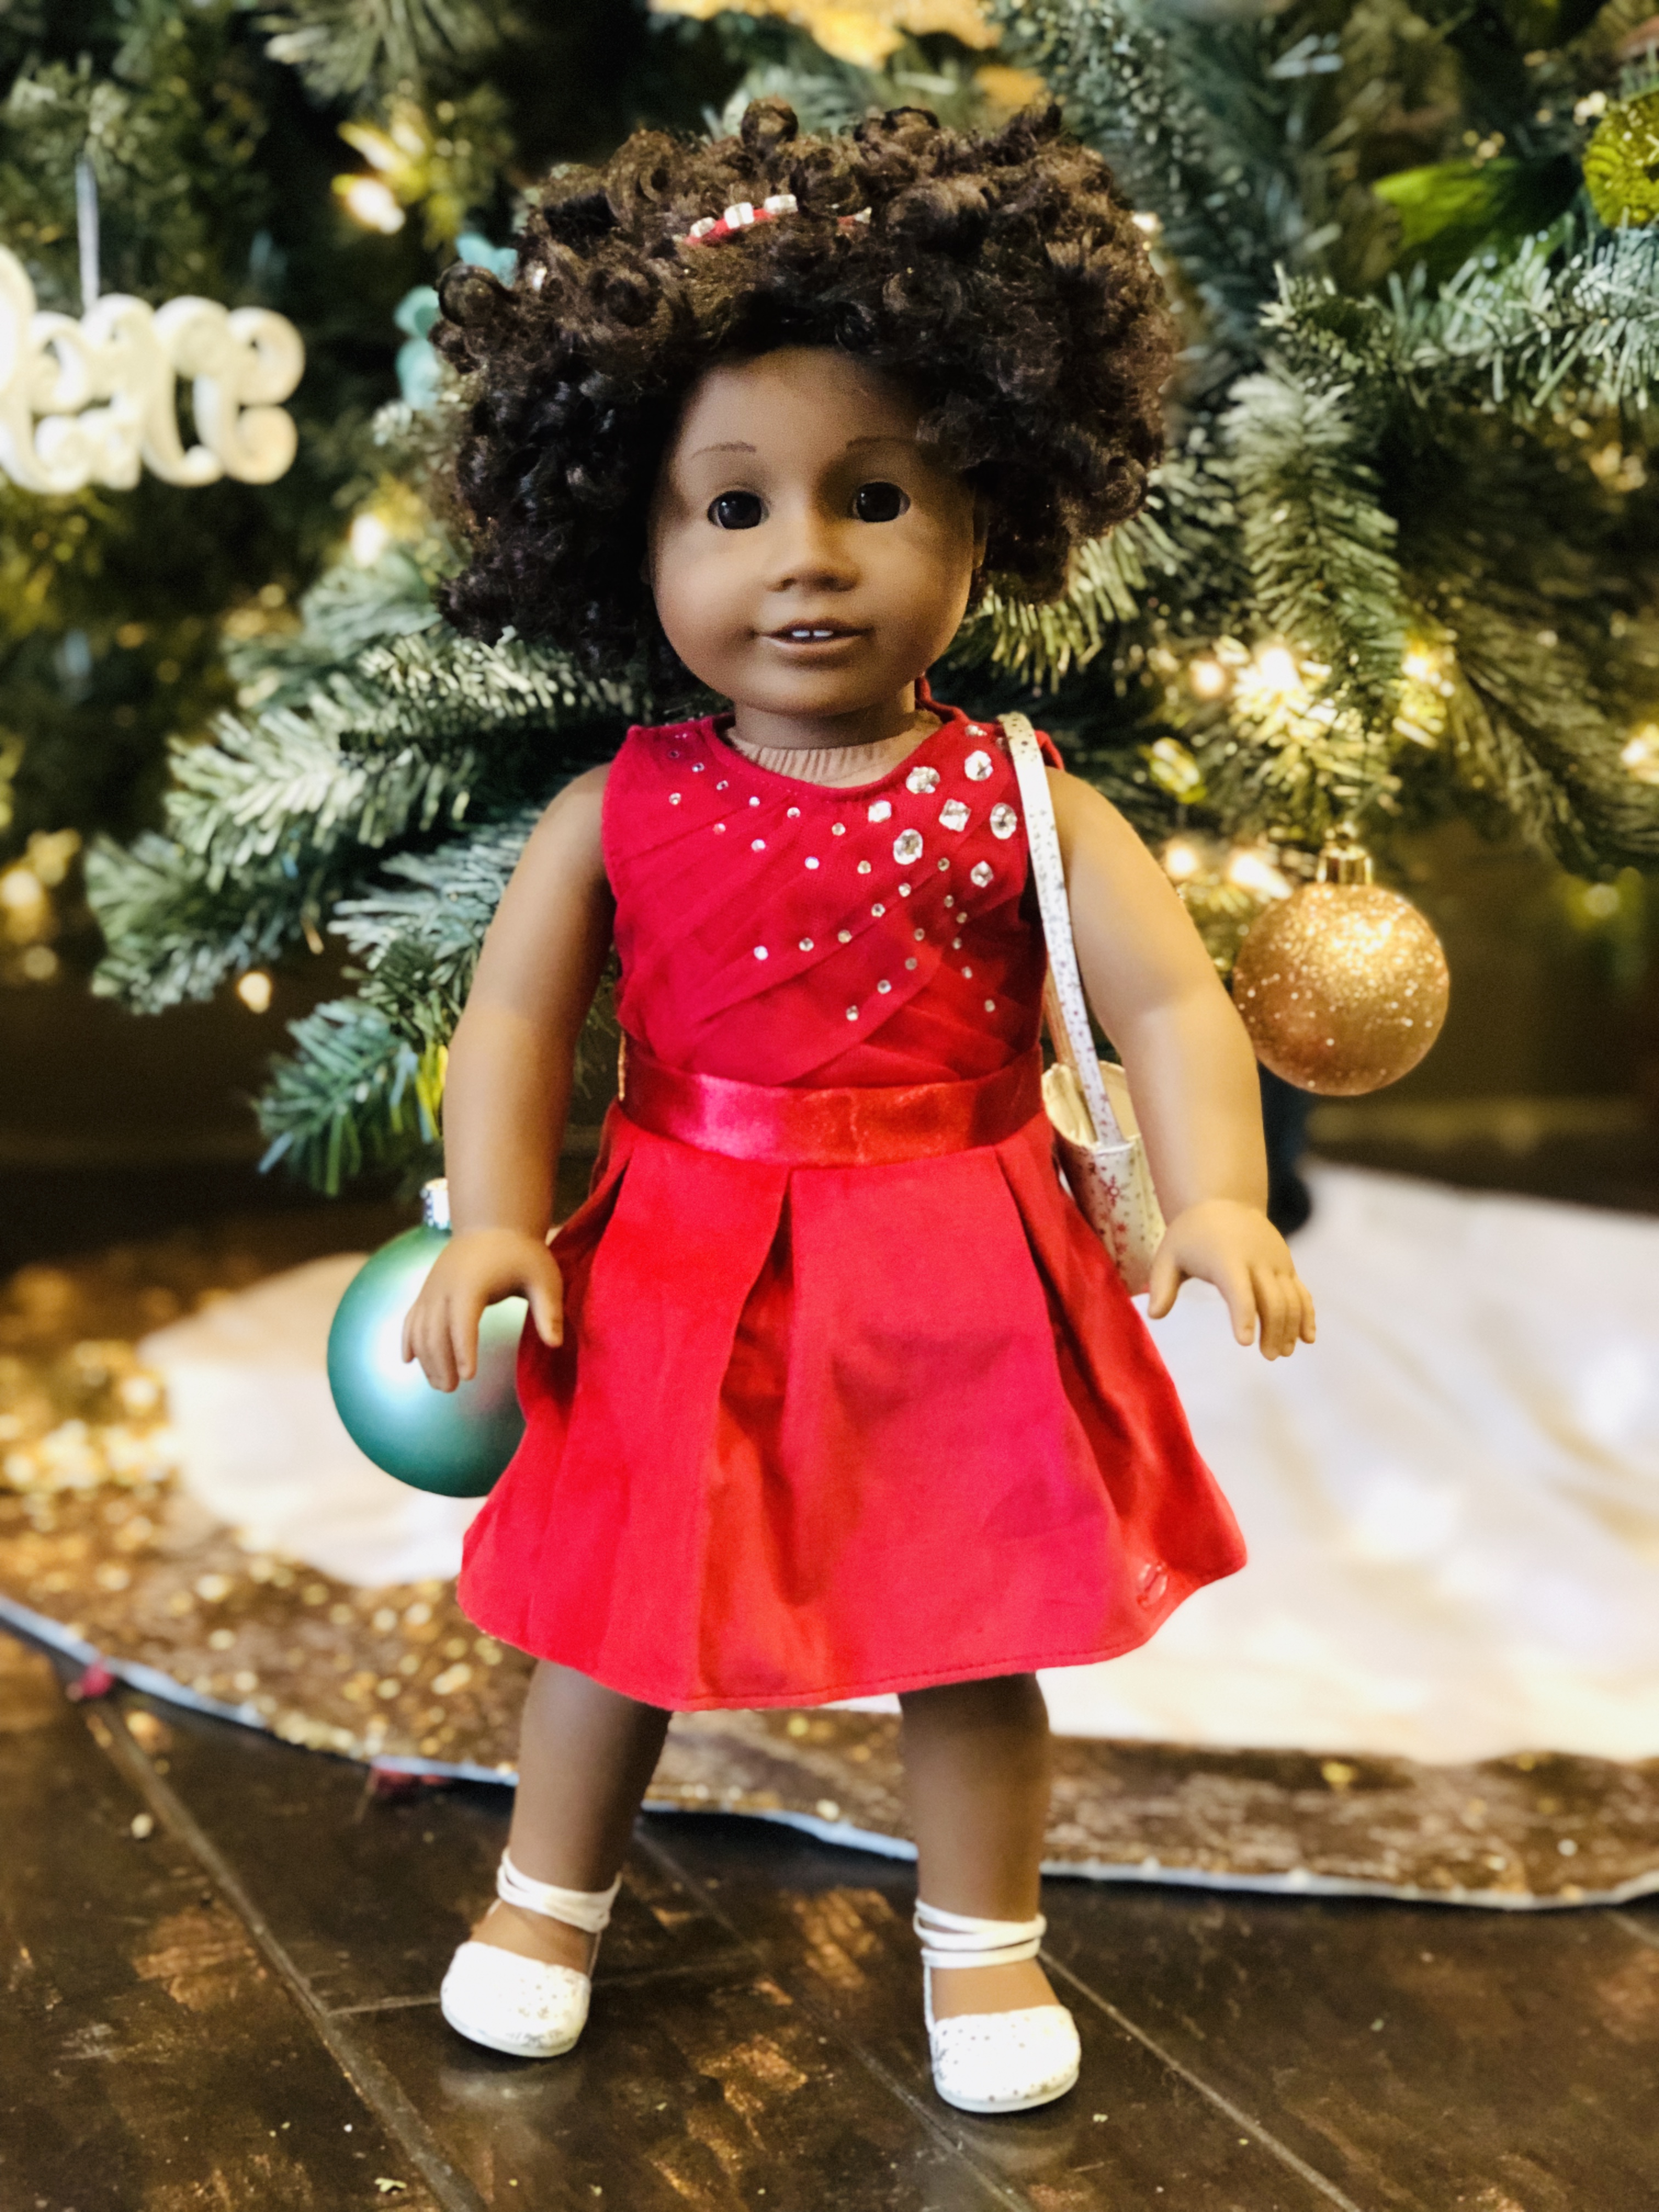 Gift Idea: American Girl Truly Me Doll